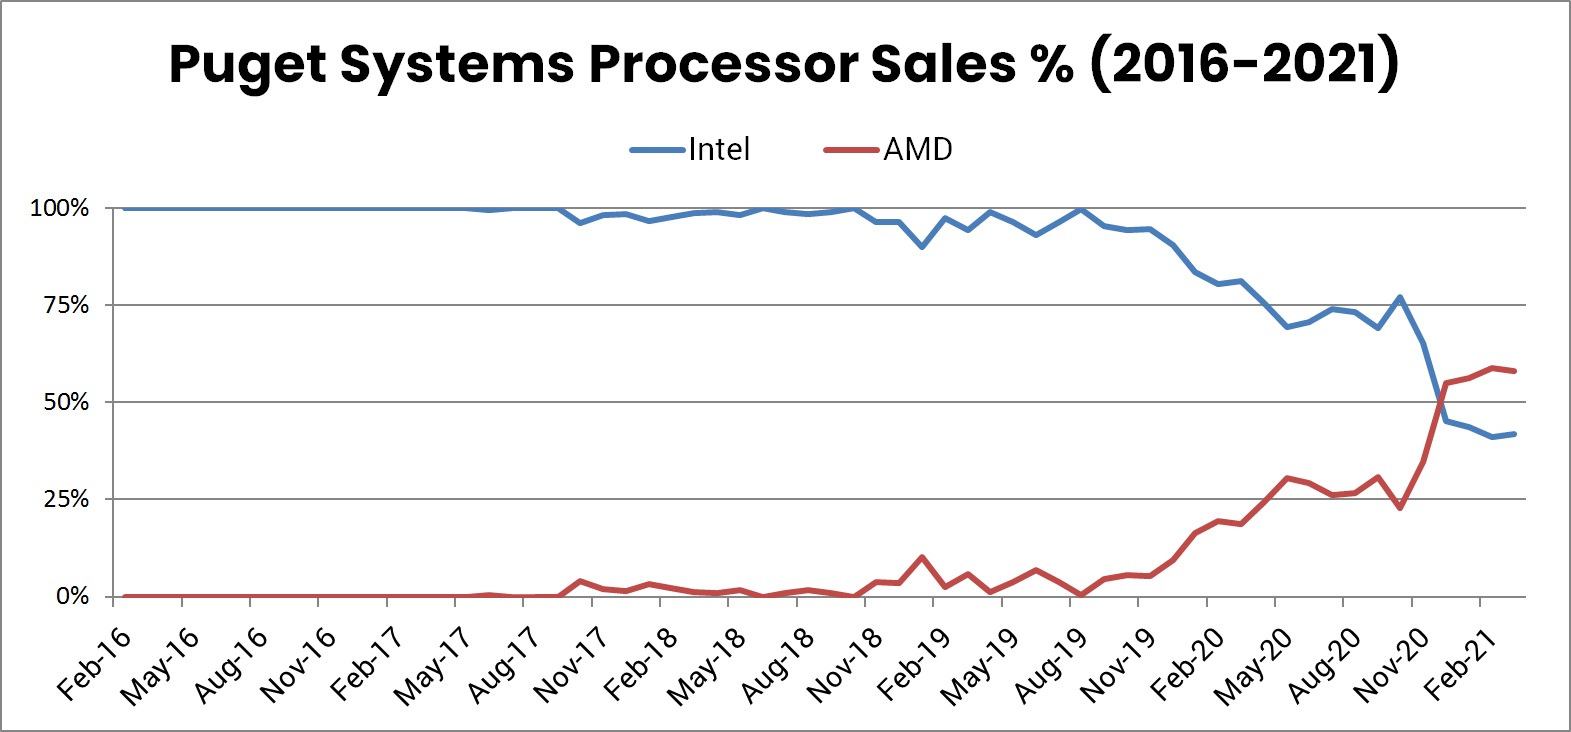 Puget Systems Processor Sales Market Share AMD vs Intel from 2016 to 2021